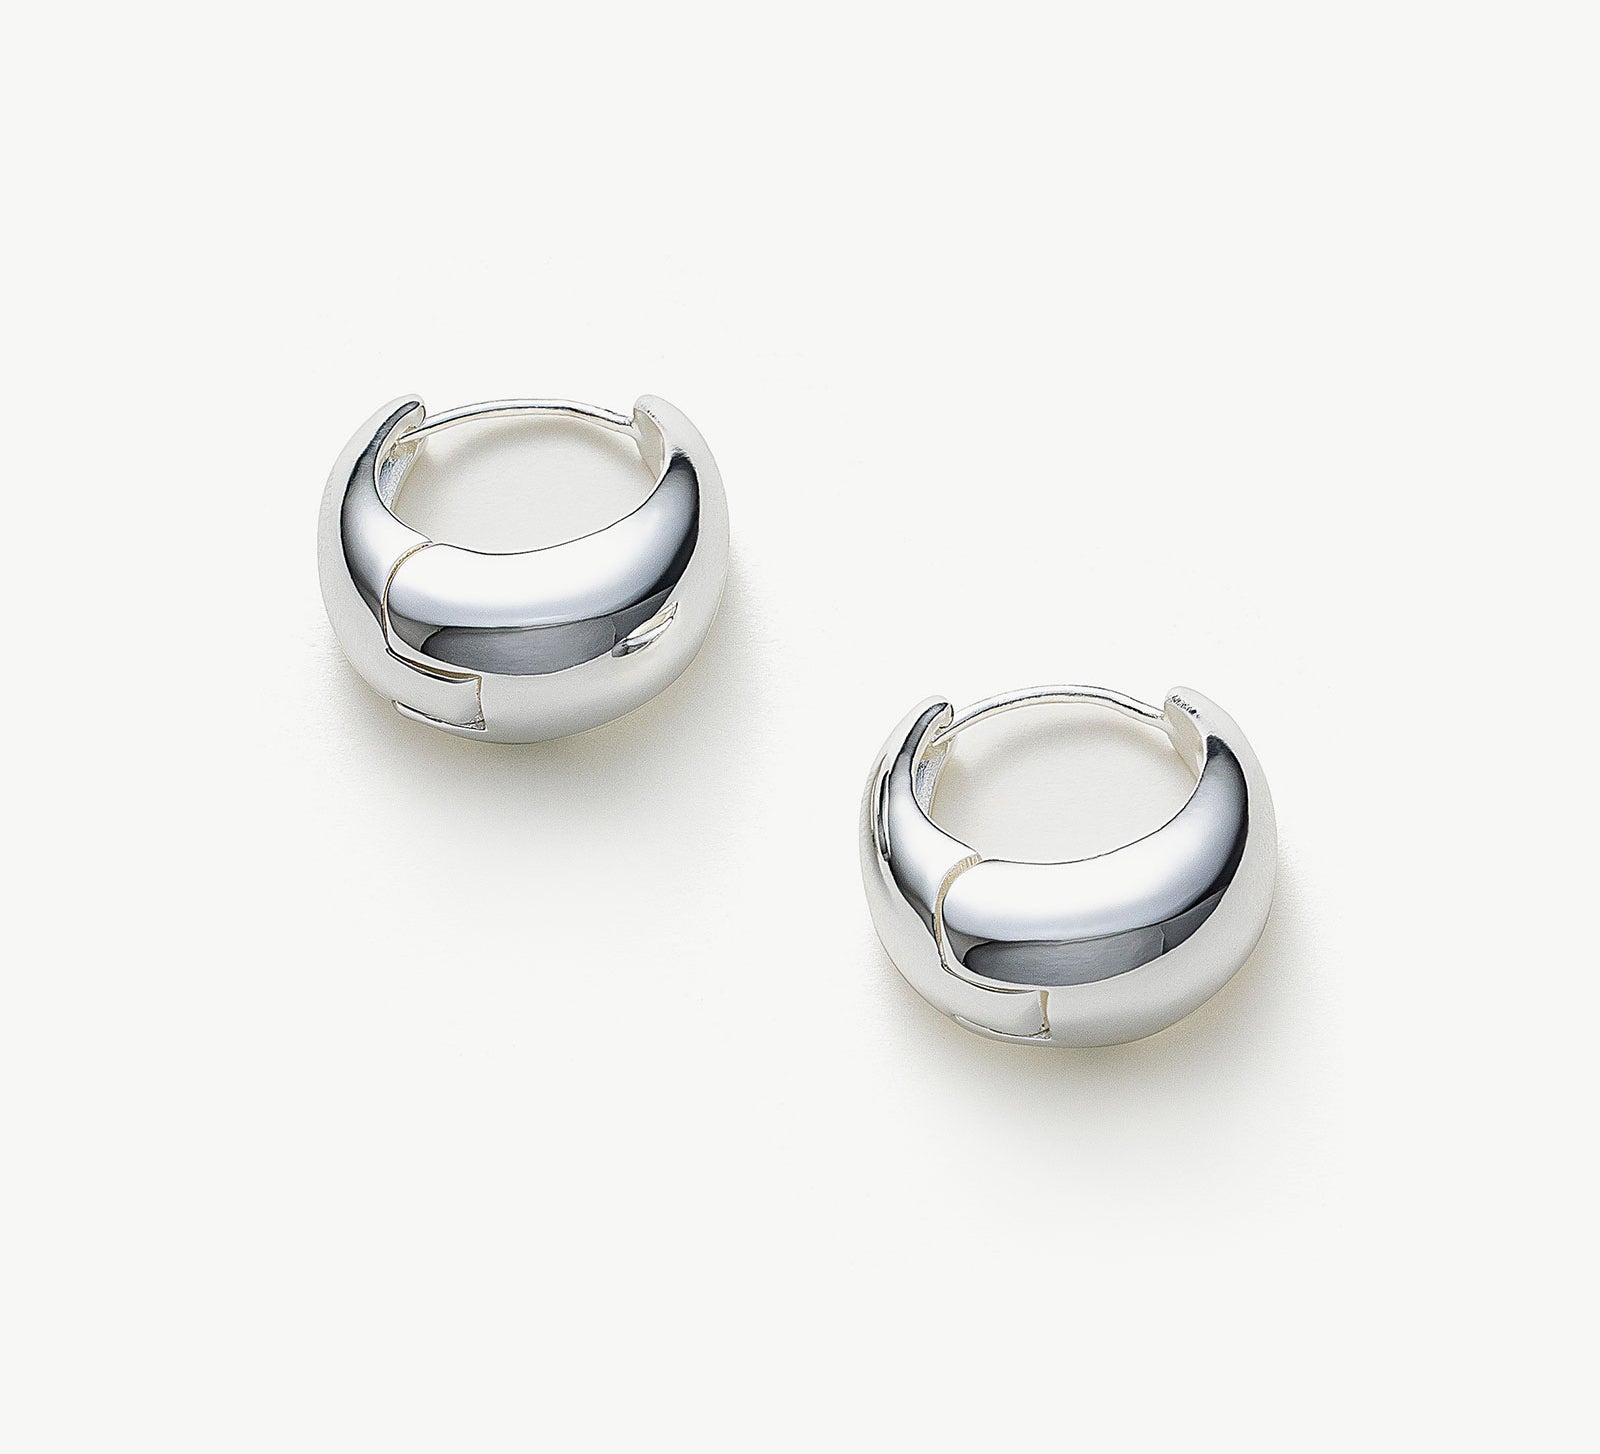  Dome Hoop Earrings in Silver, a sleek and sophisticated pair that adds a touch of modern elegance to your ears.